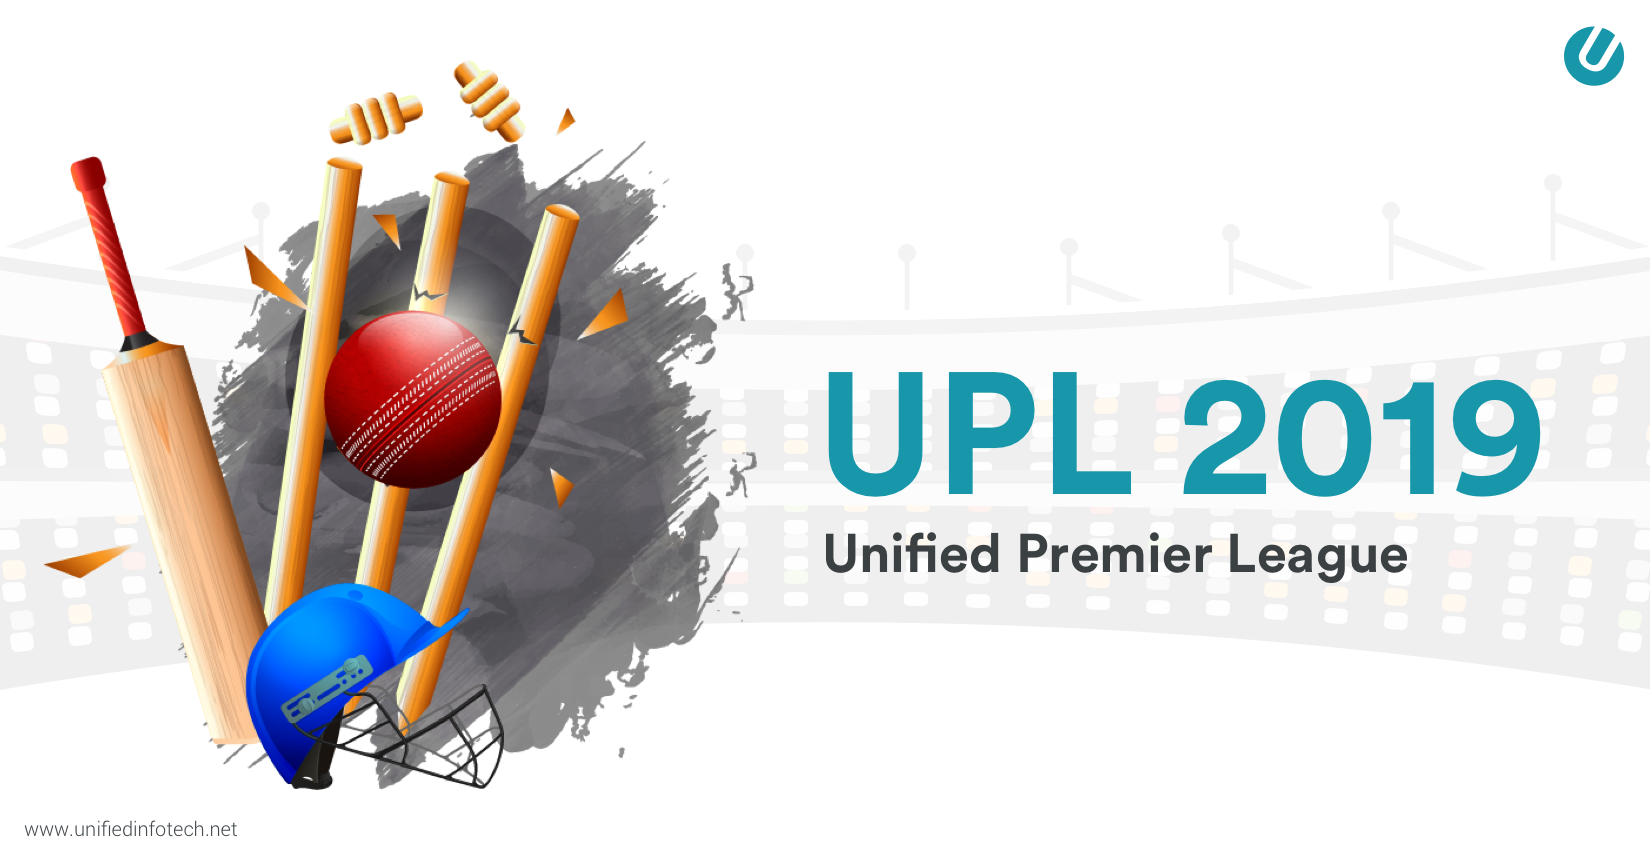 Unified Premier League 2019 Cup - A Fun Cricket Day Out!